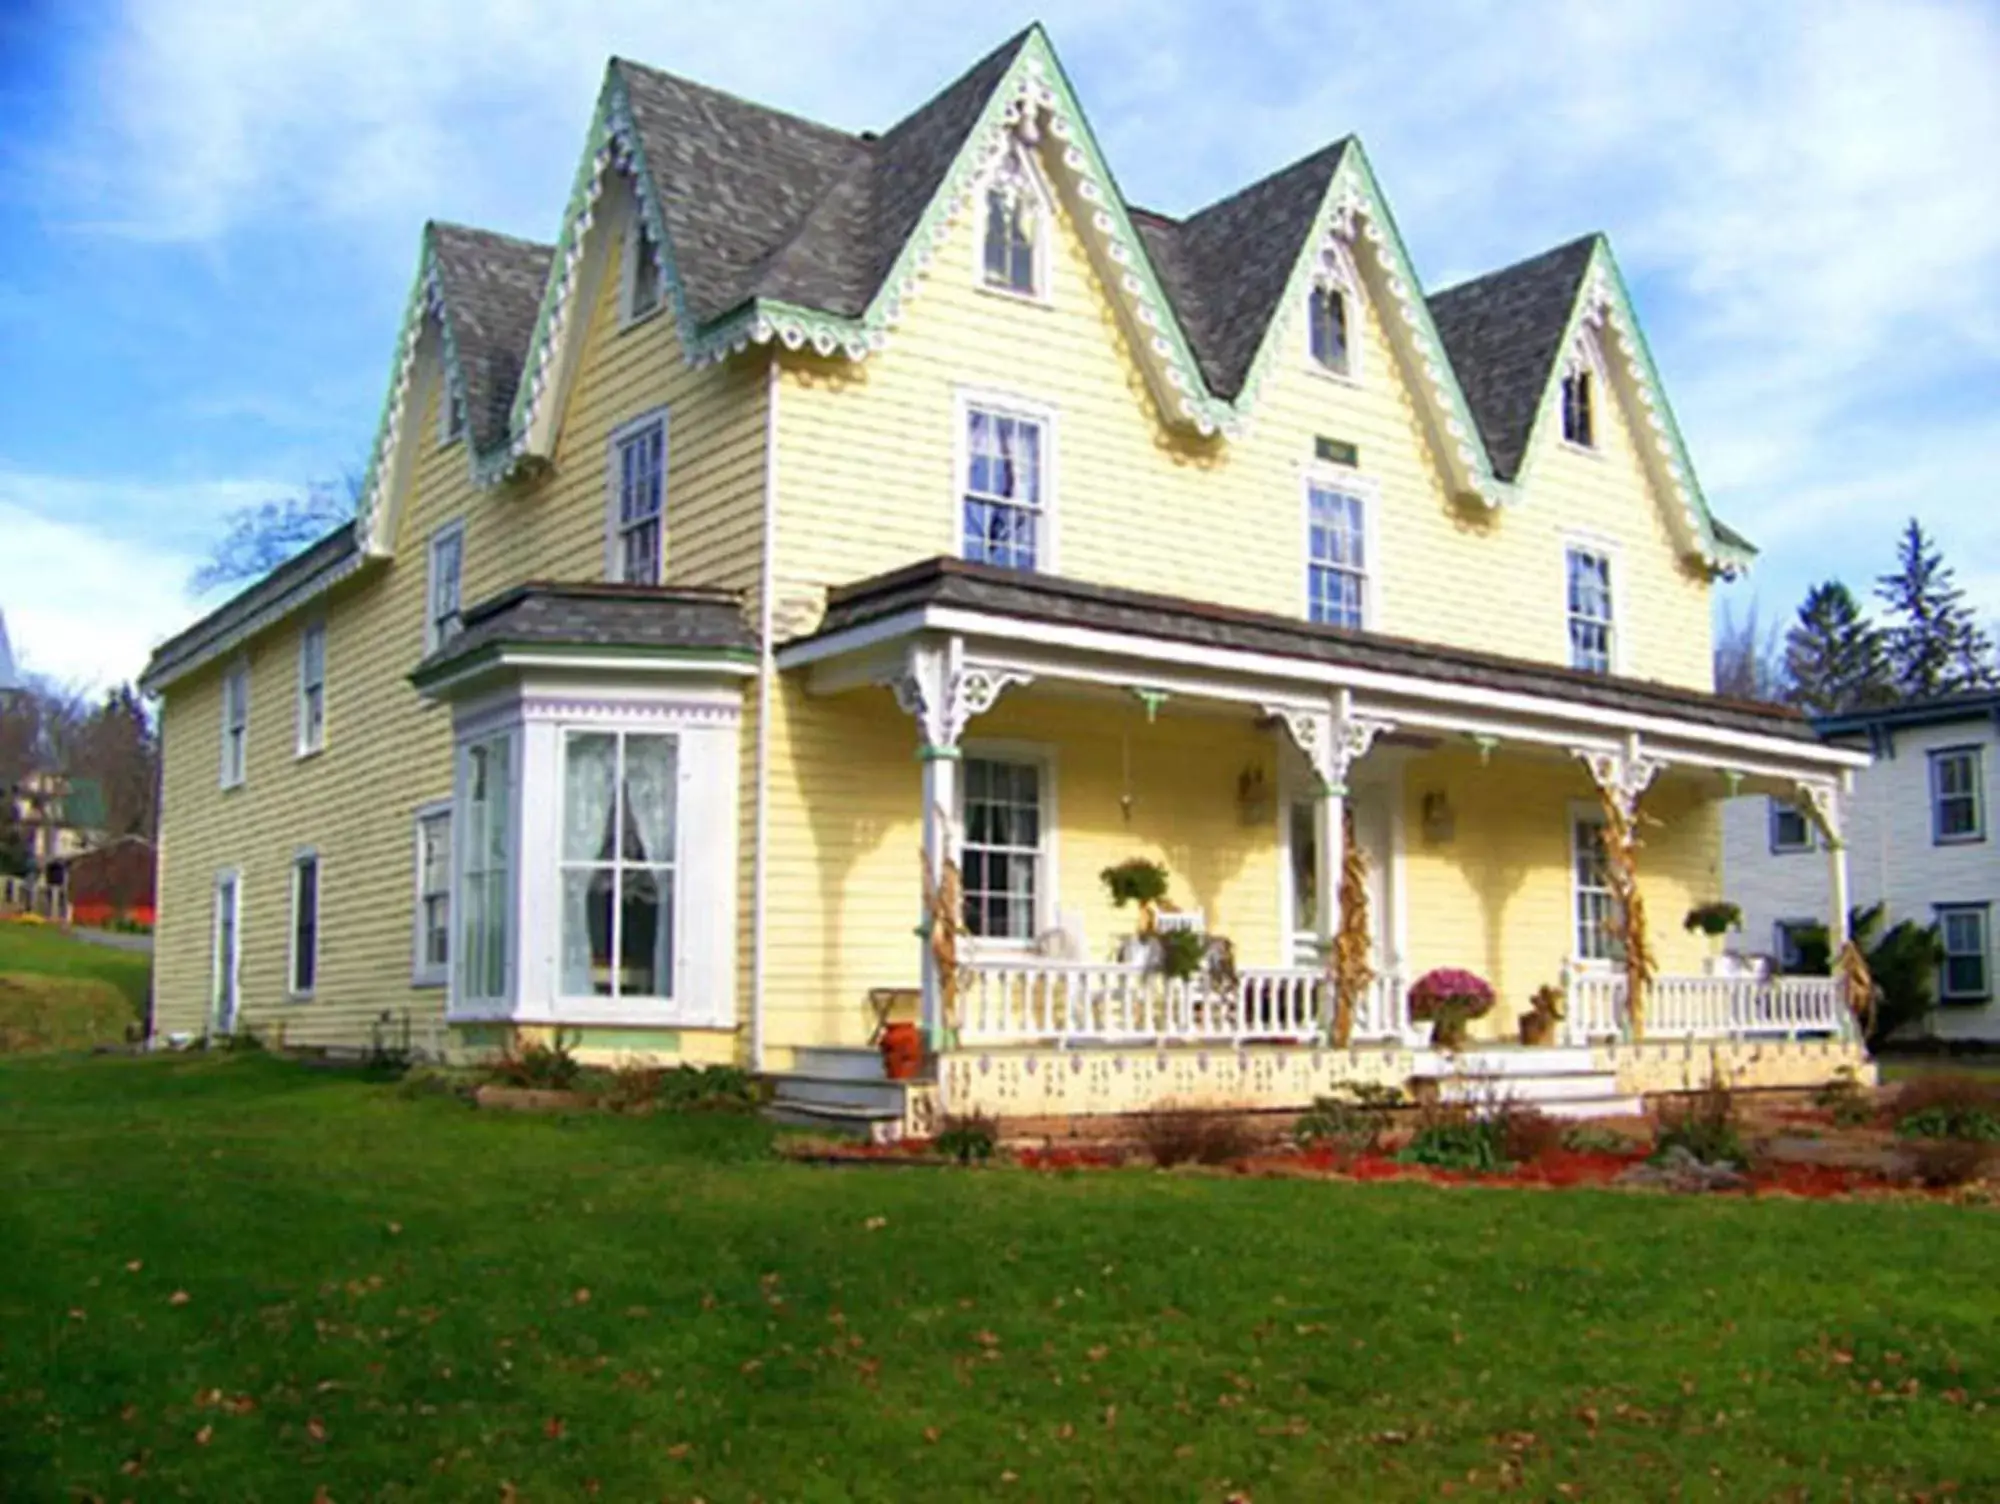 Property Building in Stamford Gables Bed and Breakfast